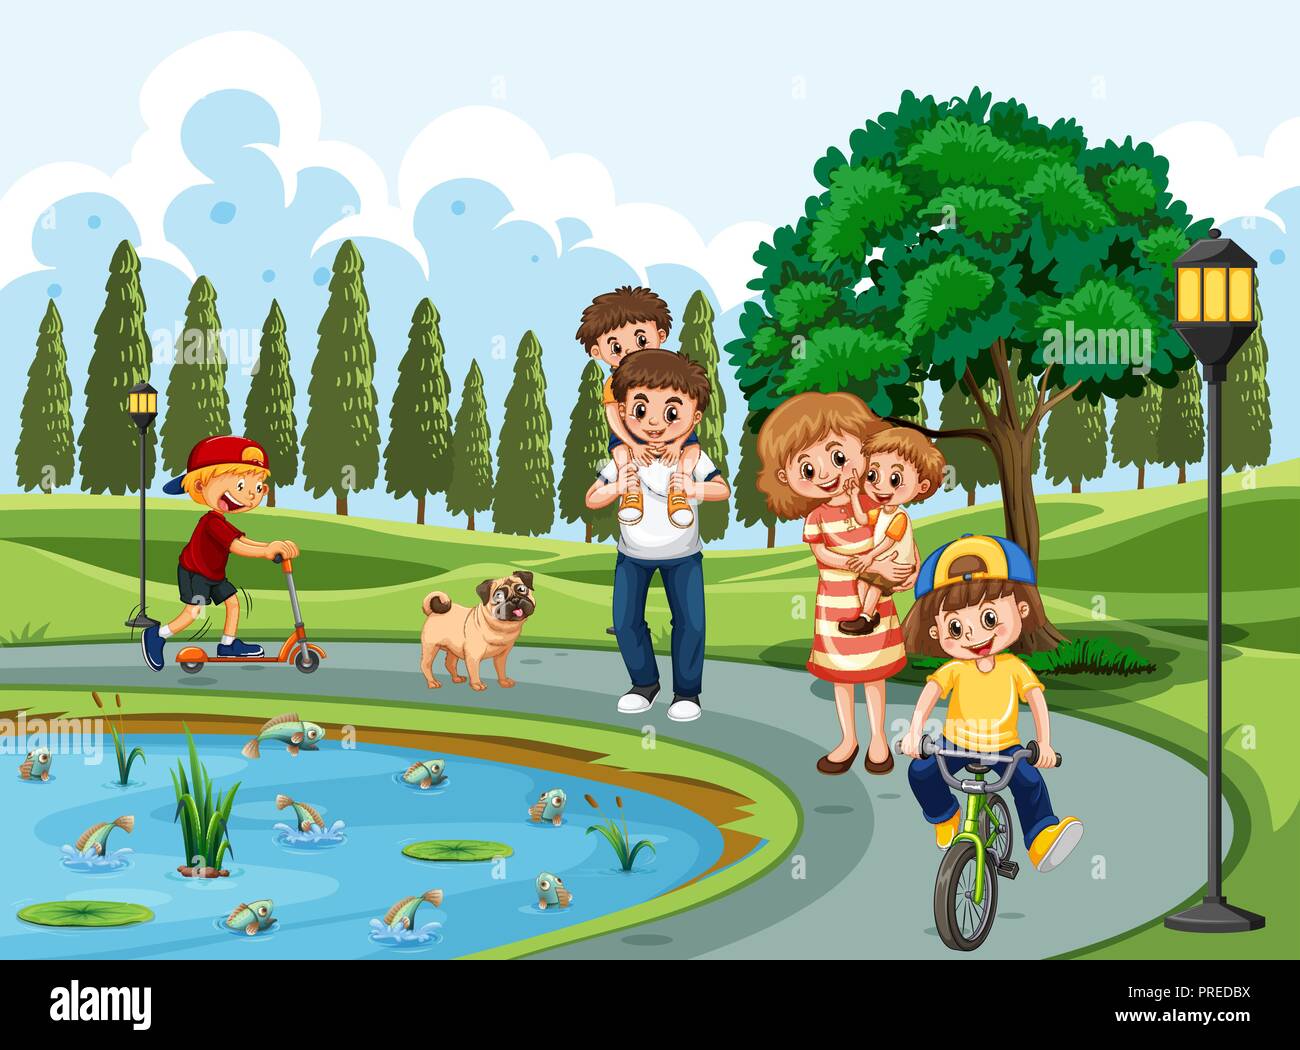 Family exercising in a park illustration Stock Vector